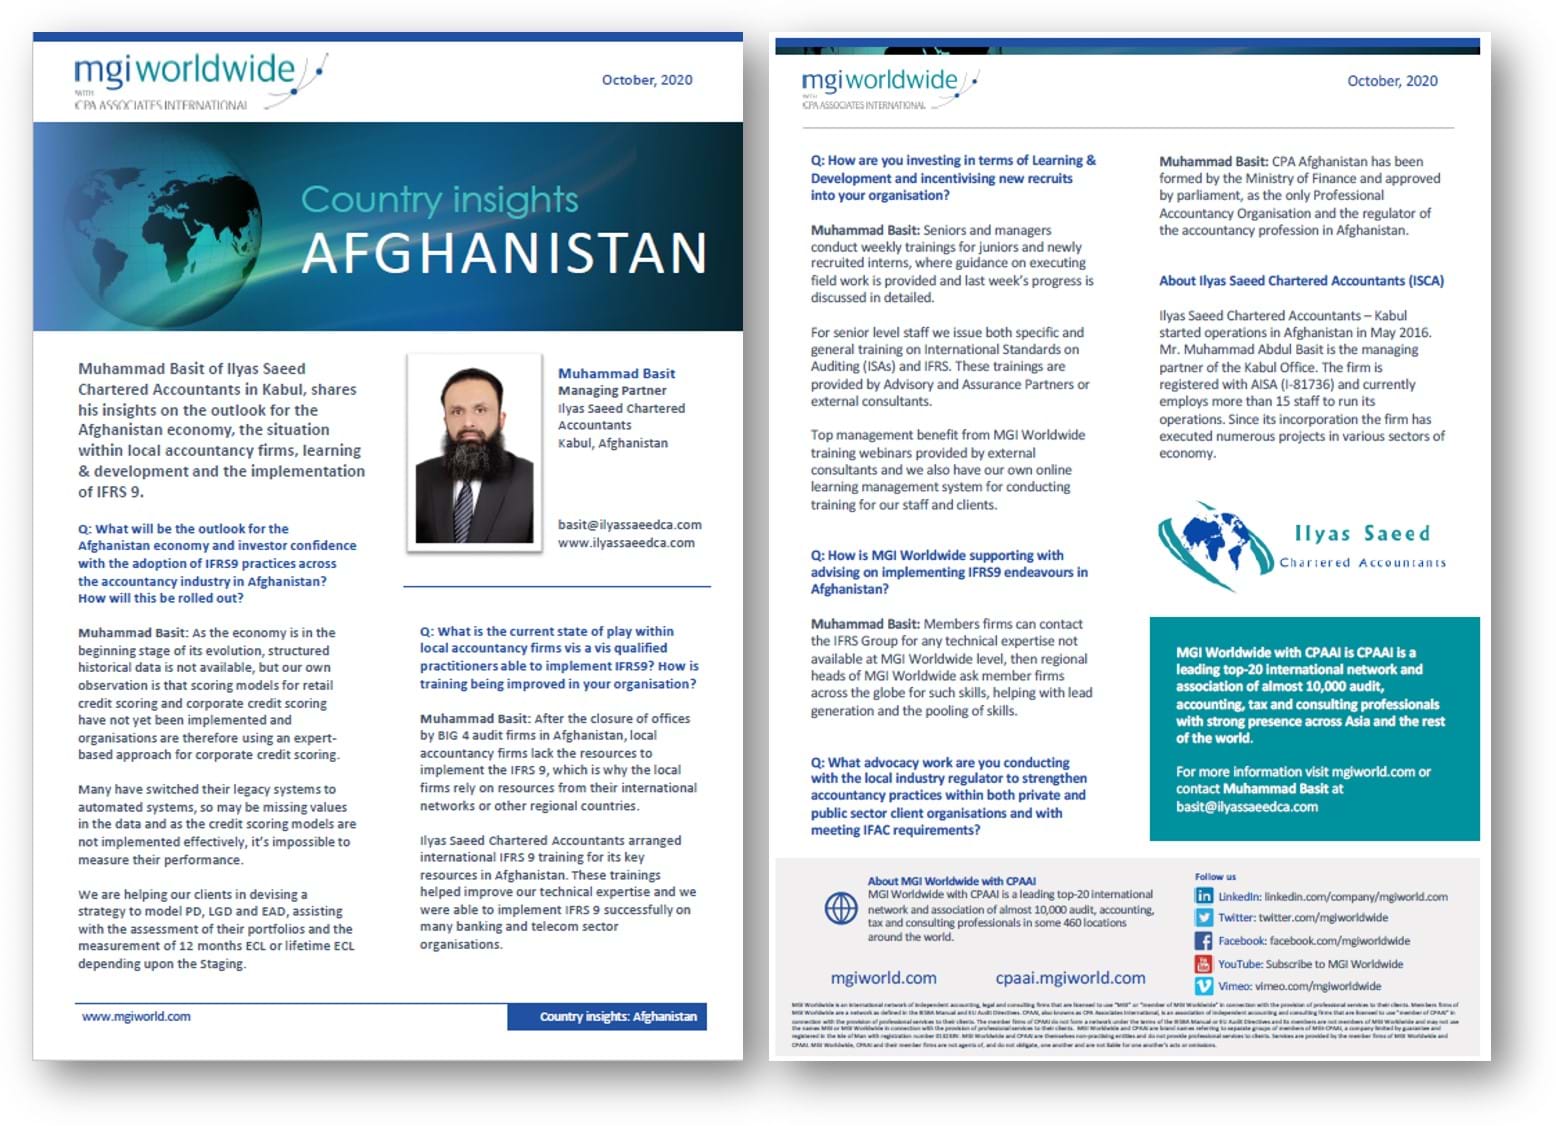 aghanistan-country-insight-pdf.jpg